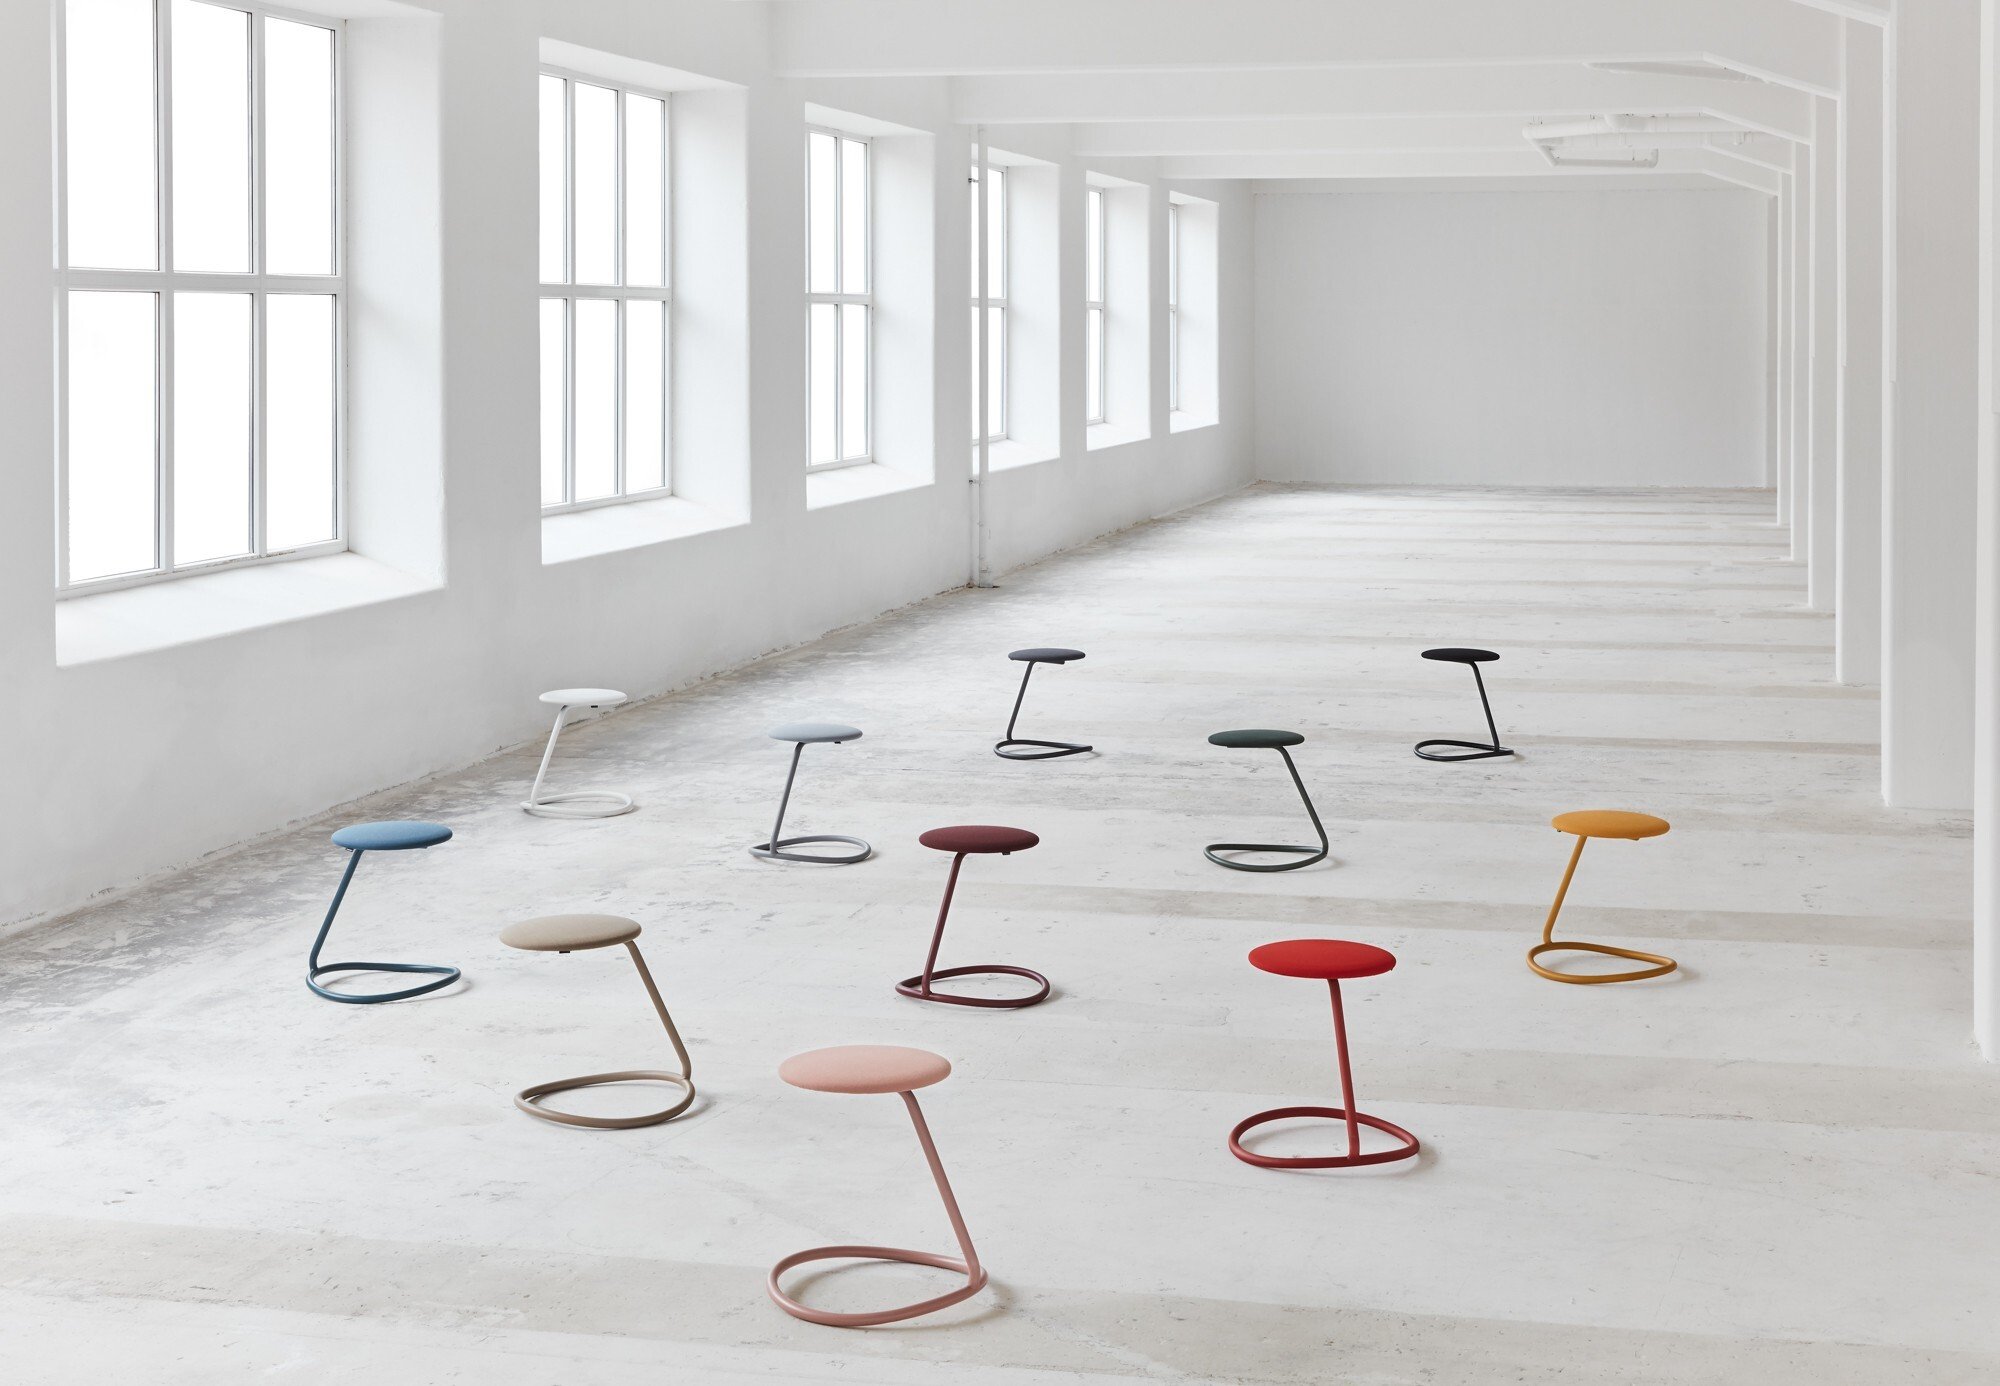 Designed by Alexander Rehn, the Rocca stool is light, modern and comes in a kaleidoscope of colours. Photo: Handout